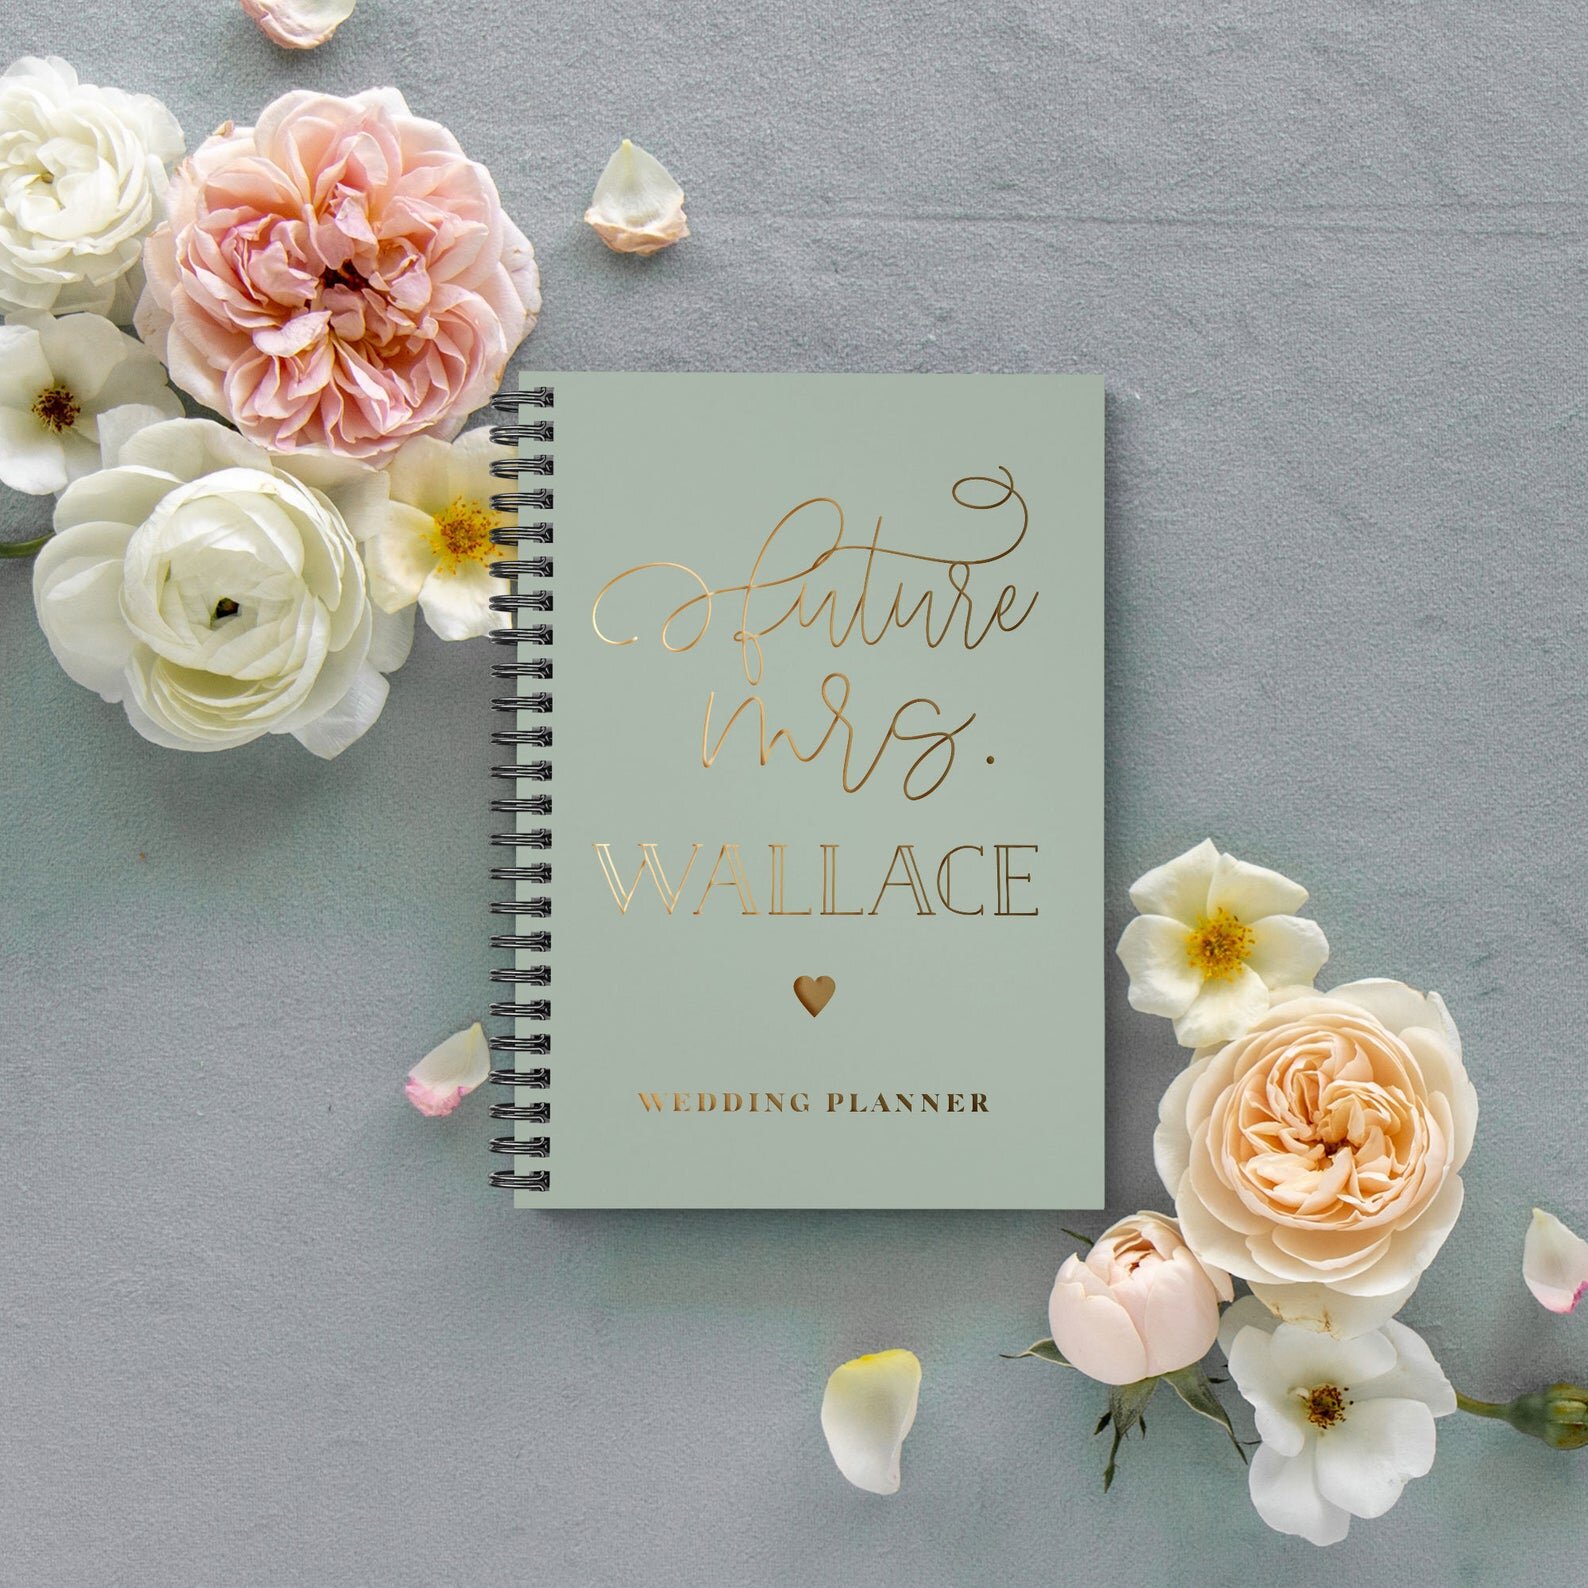 I recently purchased this wedding planner off of Etsy for my best friend as an engagement gift. It has several sections for budgeting, to-do lists, vendors, etc. Click here to check it out and customize one for yourself!